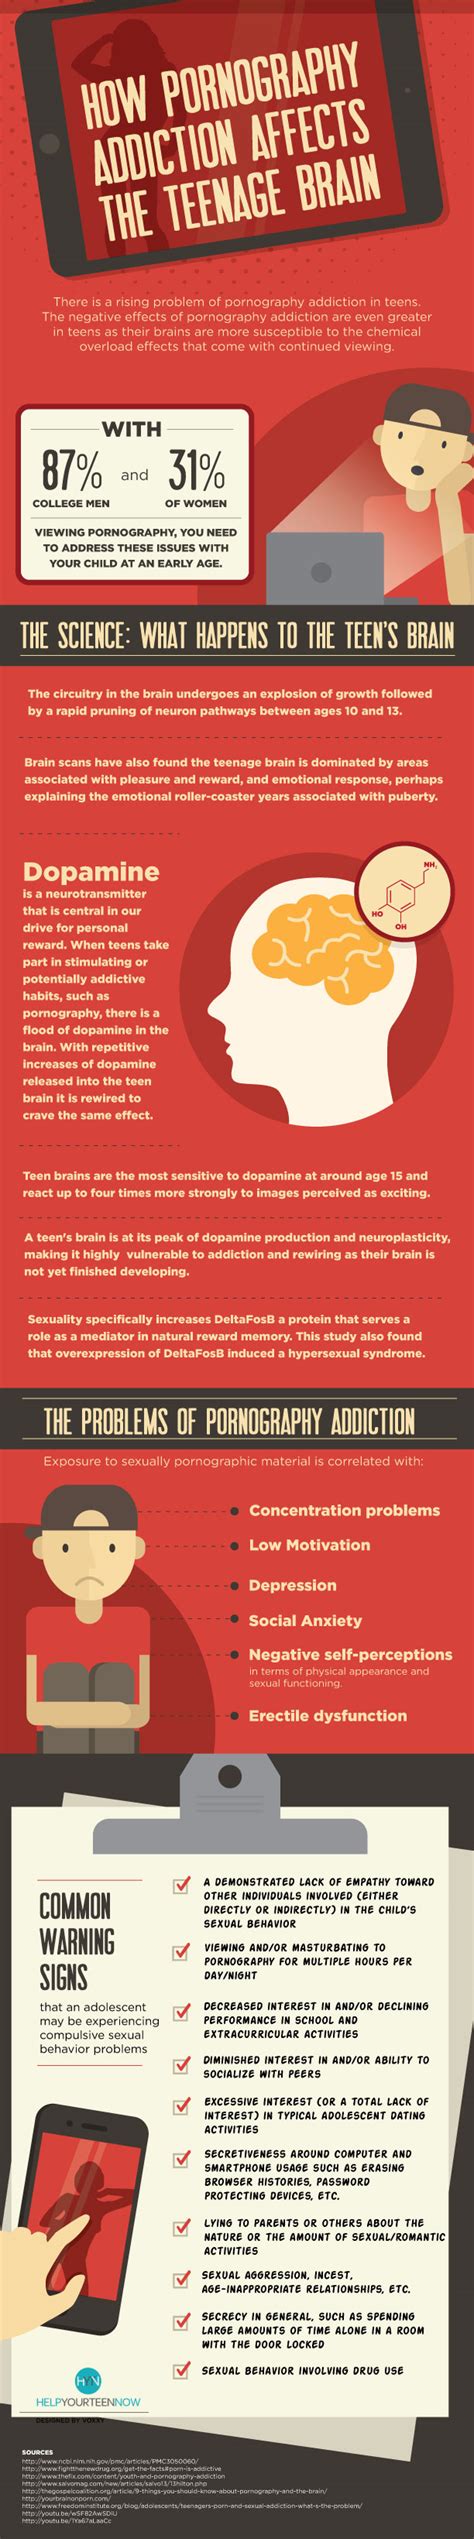 how pornography addiction affects the teenage brain infographic help your teen now